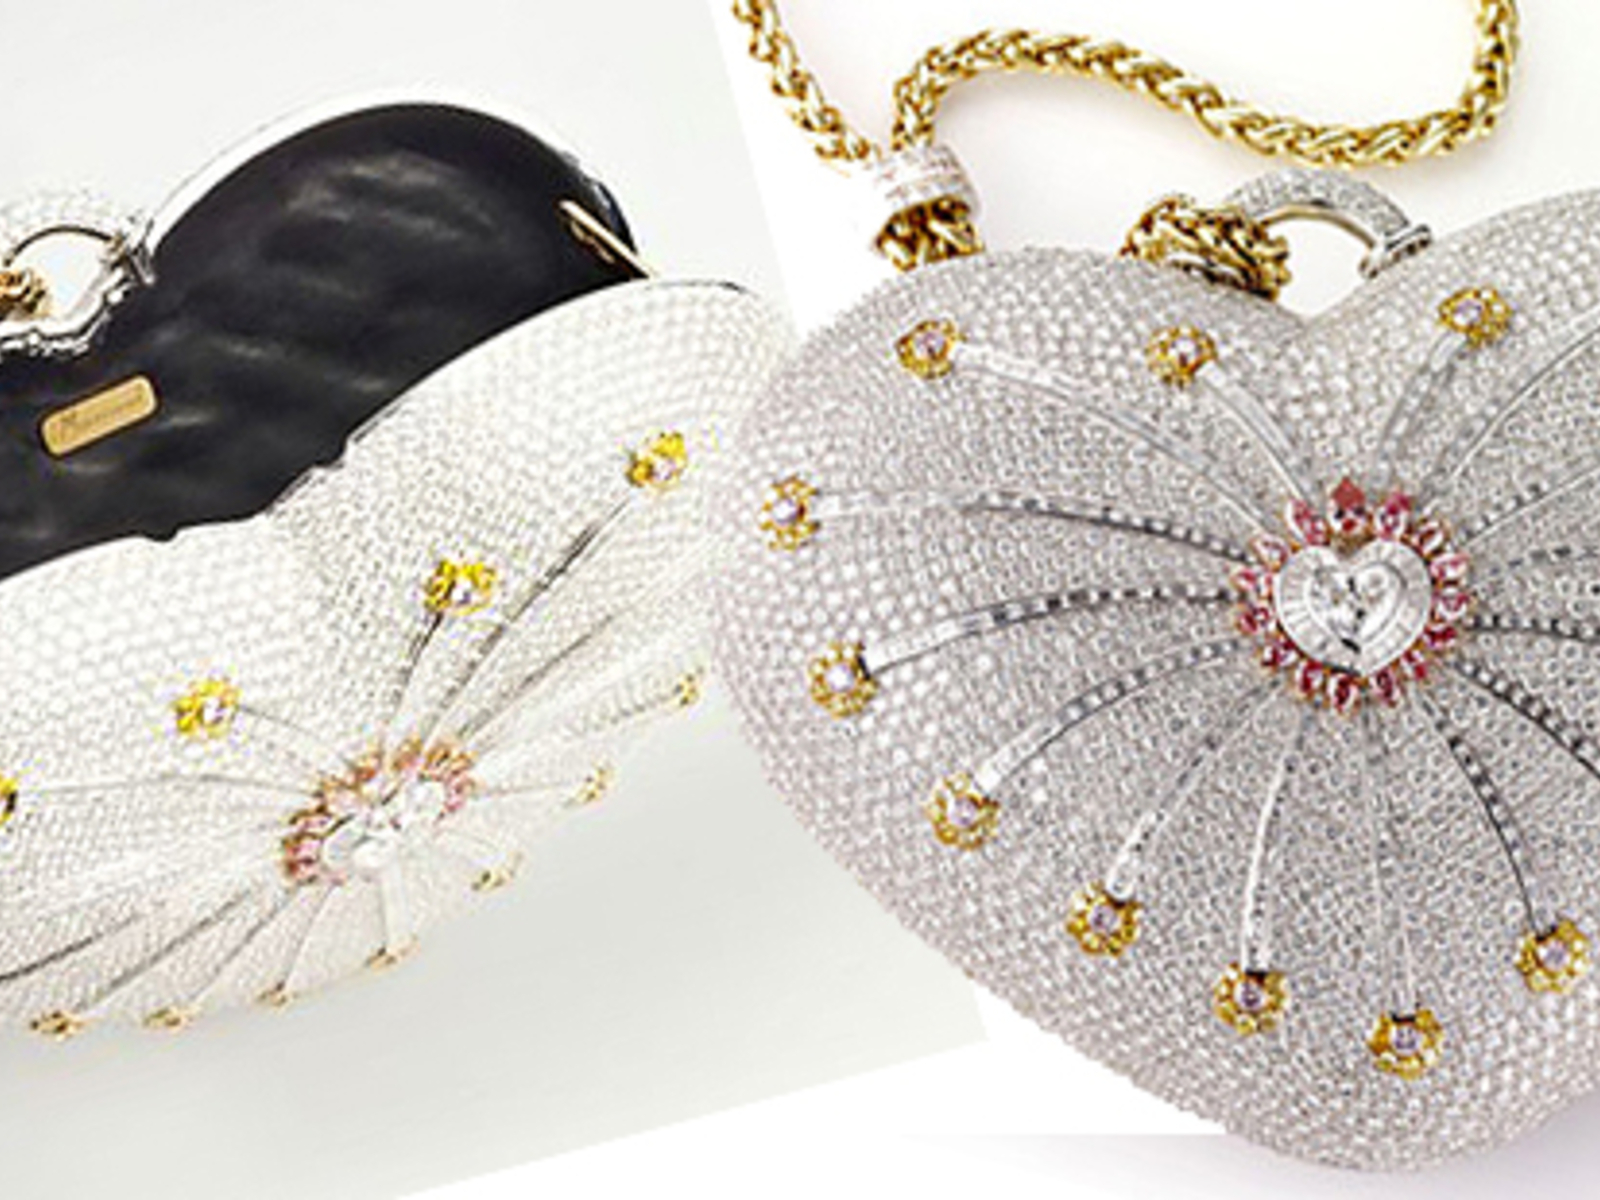 The World's Most Expensive Handbags - Live Trading News